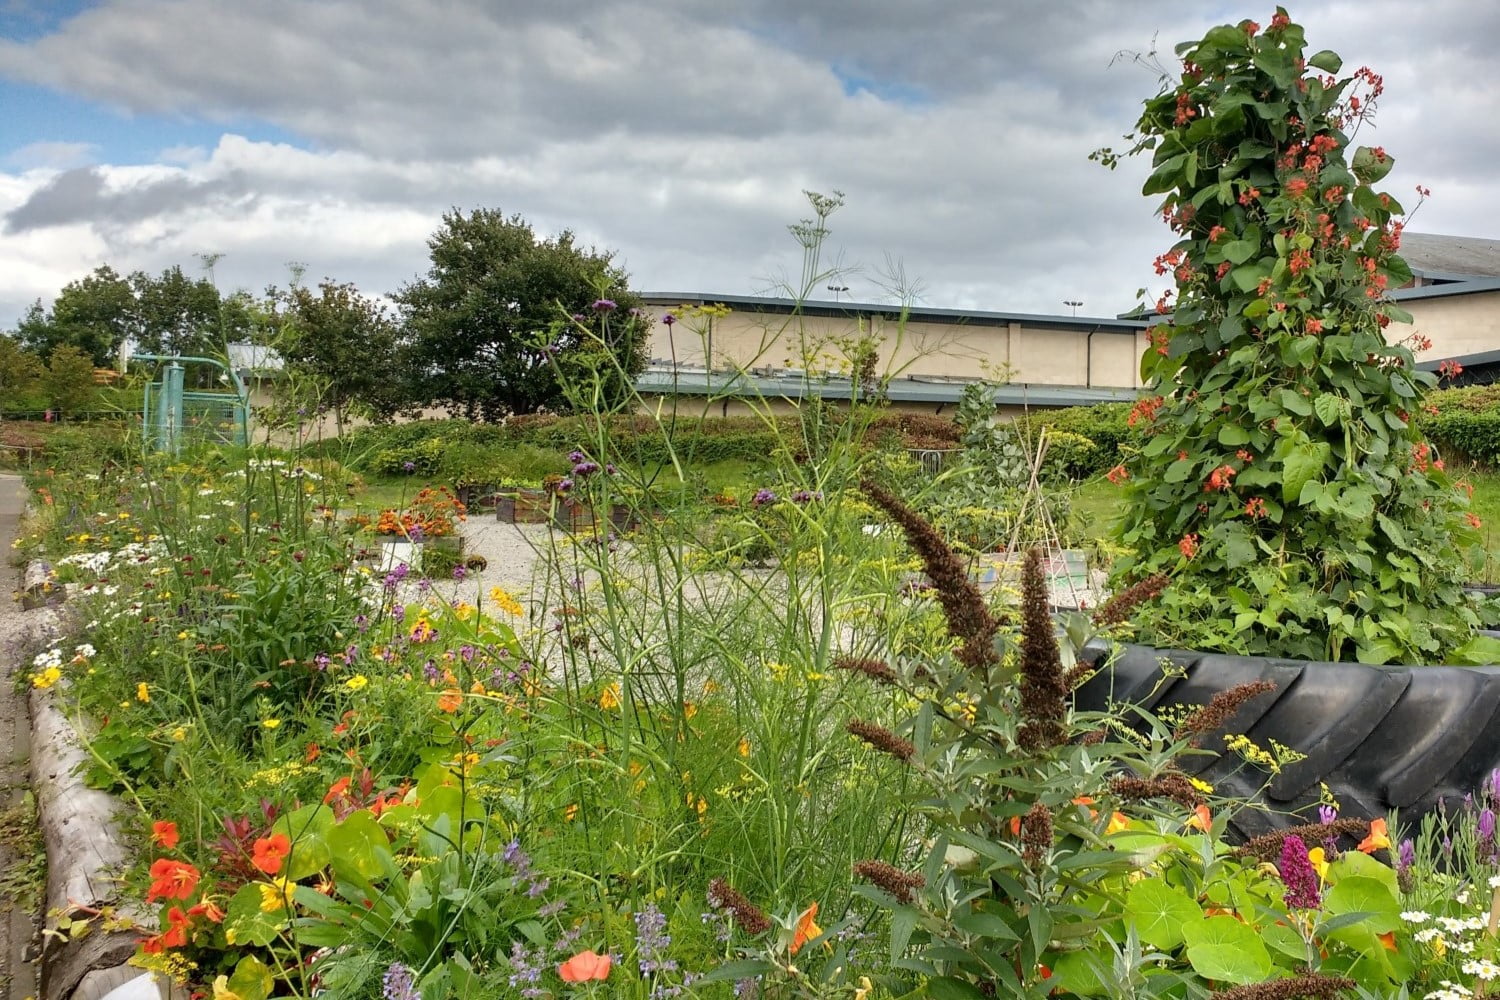 A school garden filled with pollinator friendly plants in some climate ready school grounds.